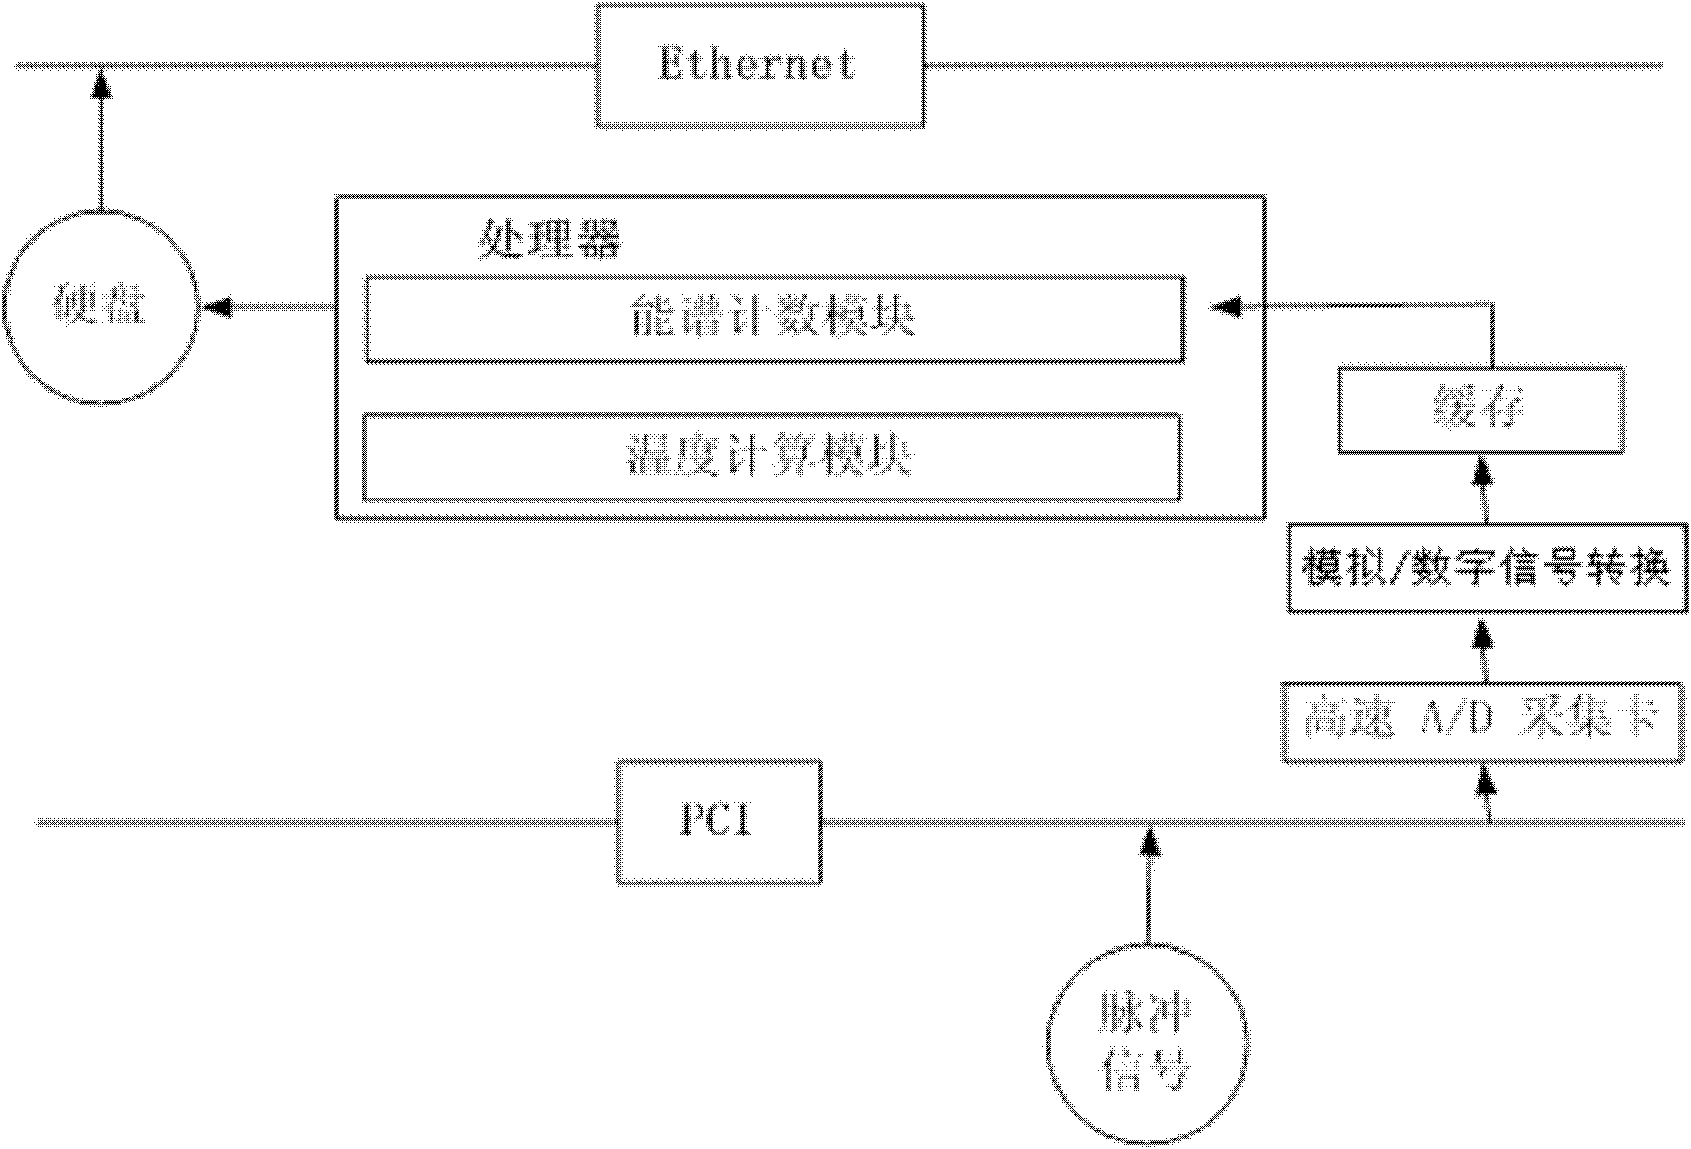 Processing method and device for multi-channel energy spectrum measurement